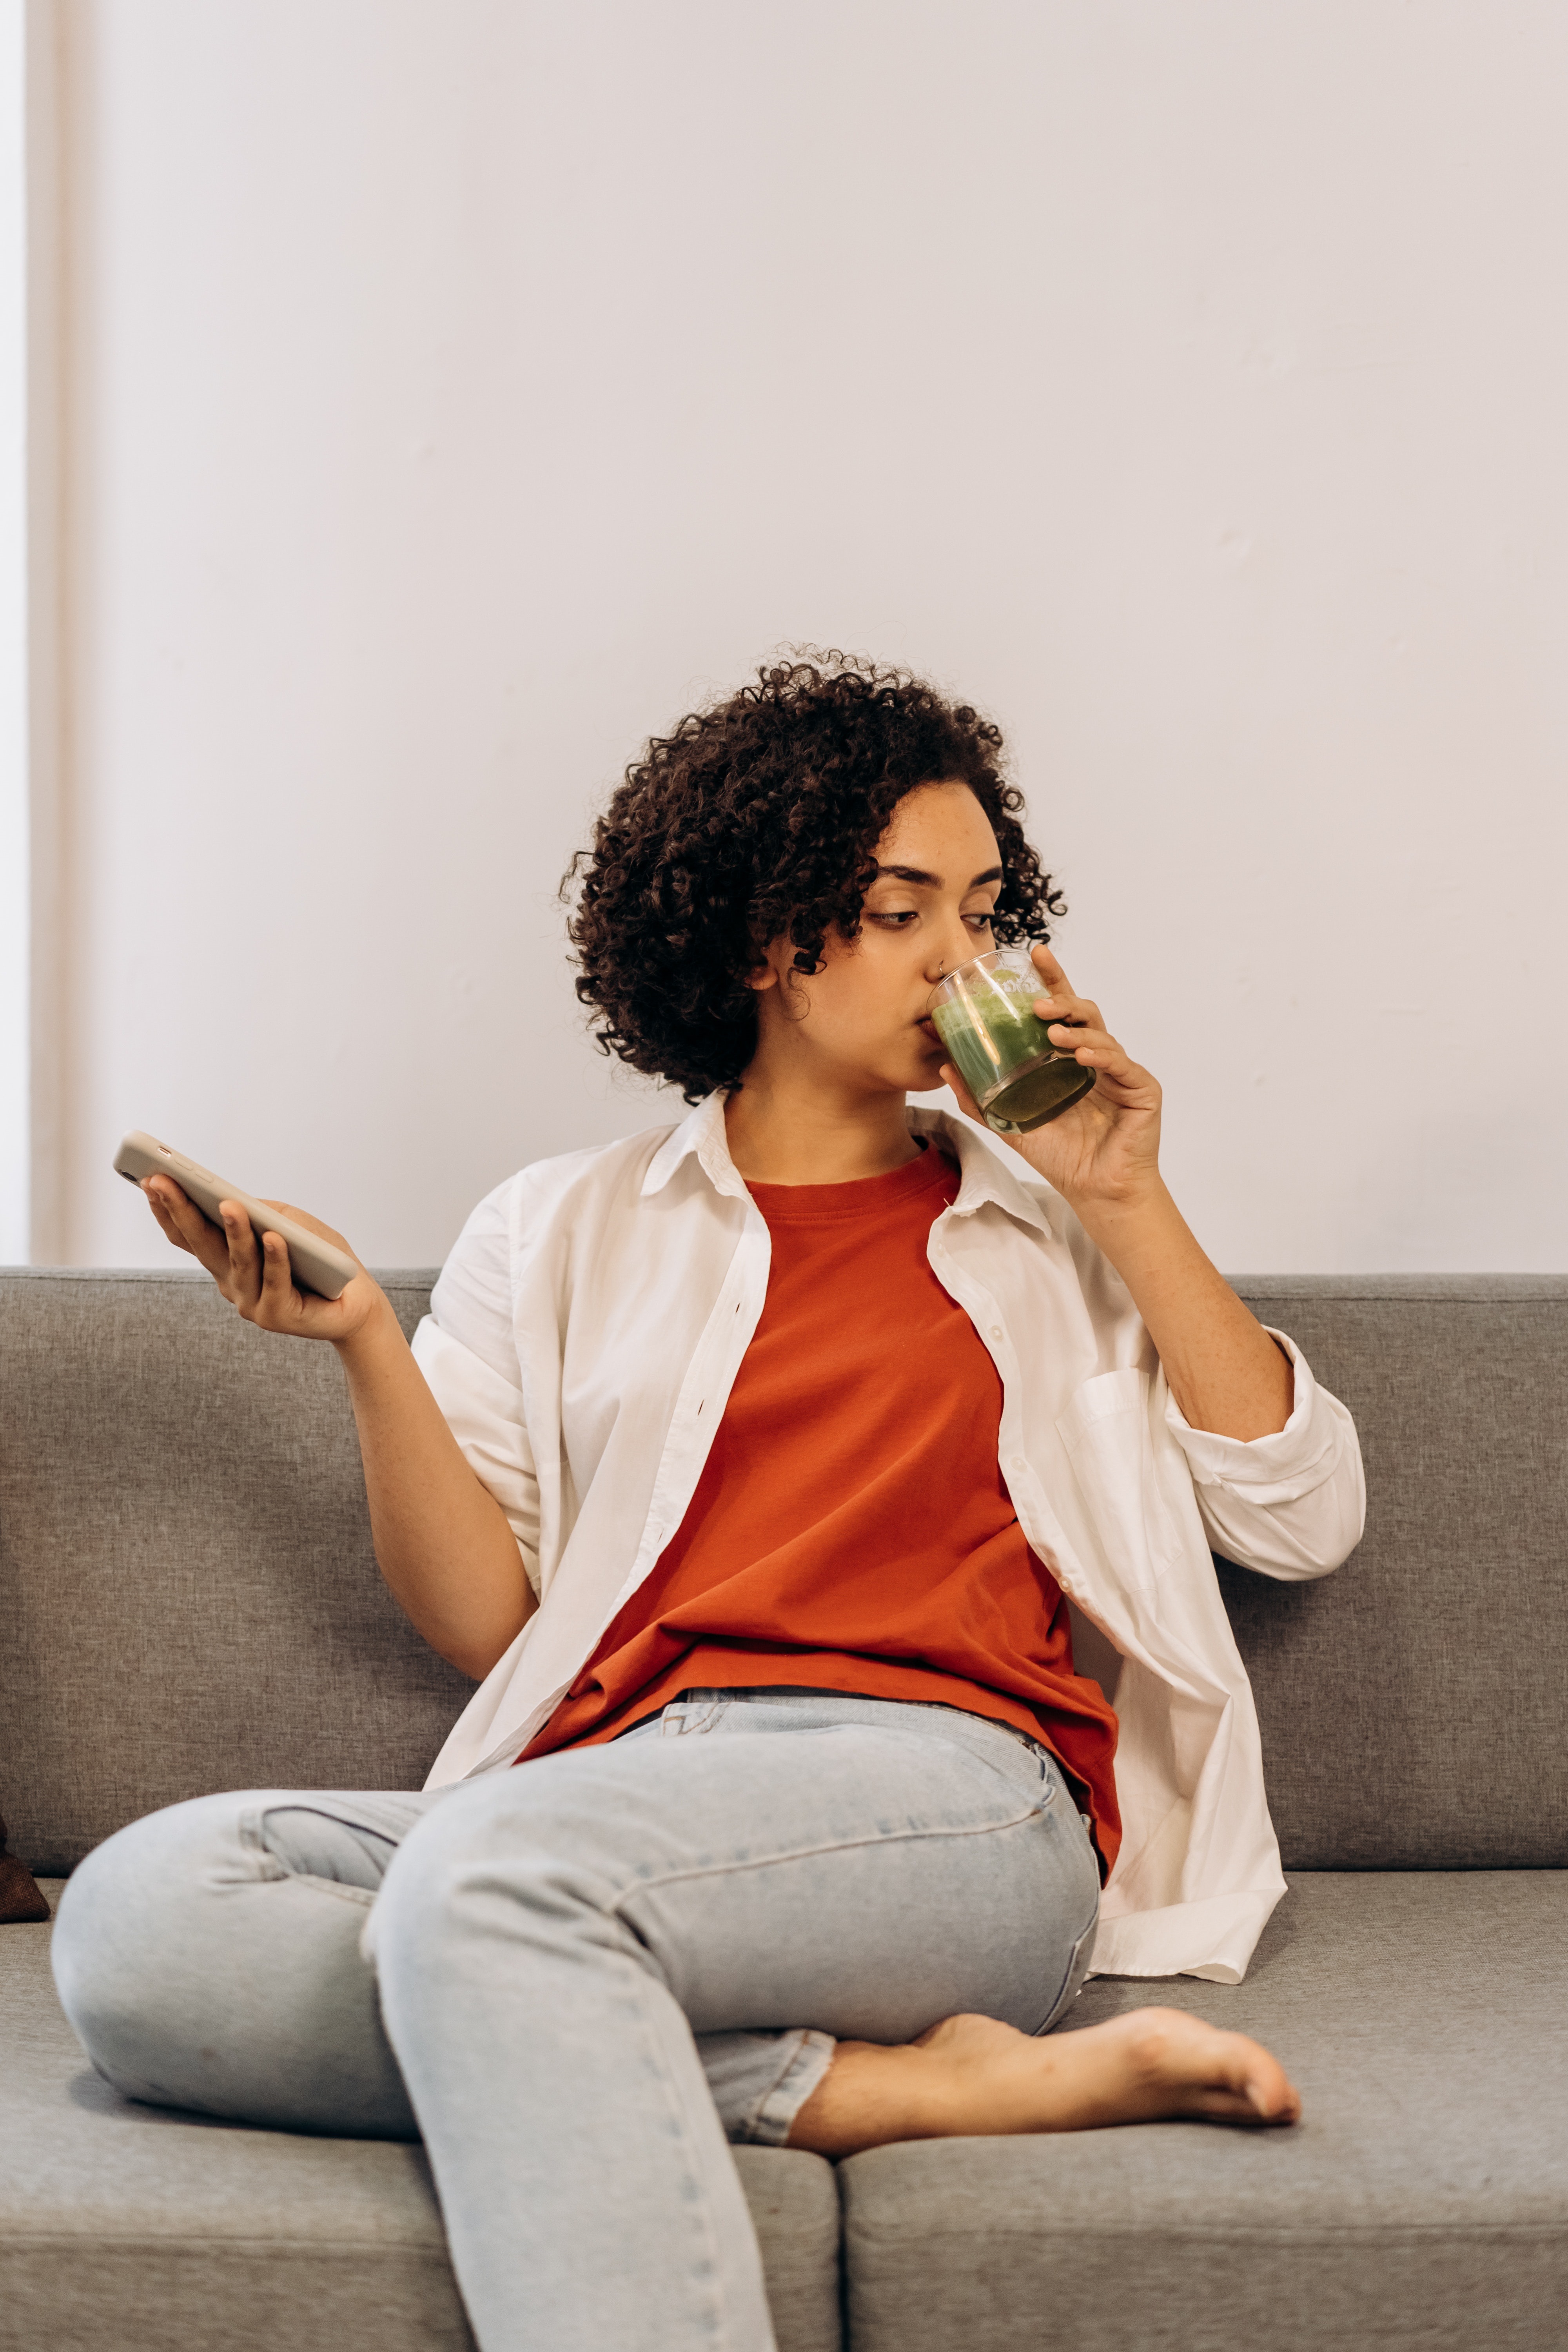 Woman Sitting on Couch Drinking Green Juice